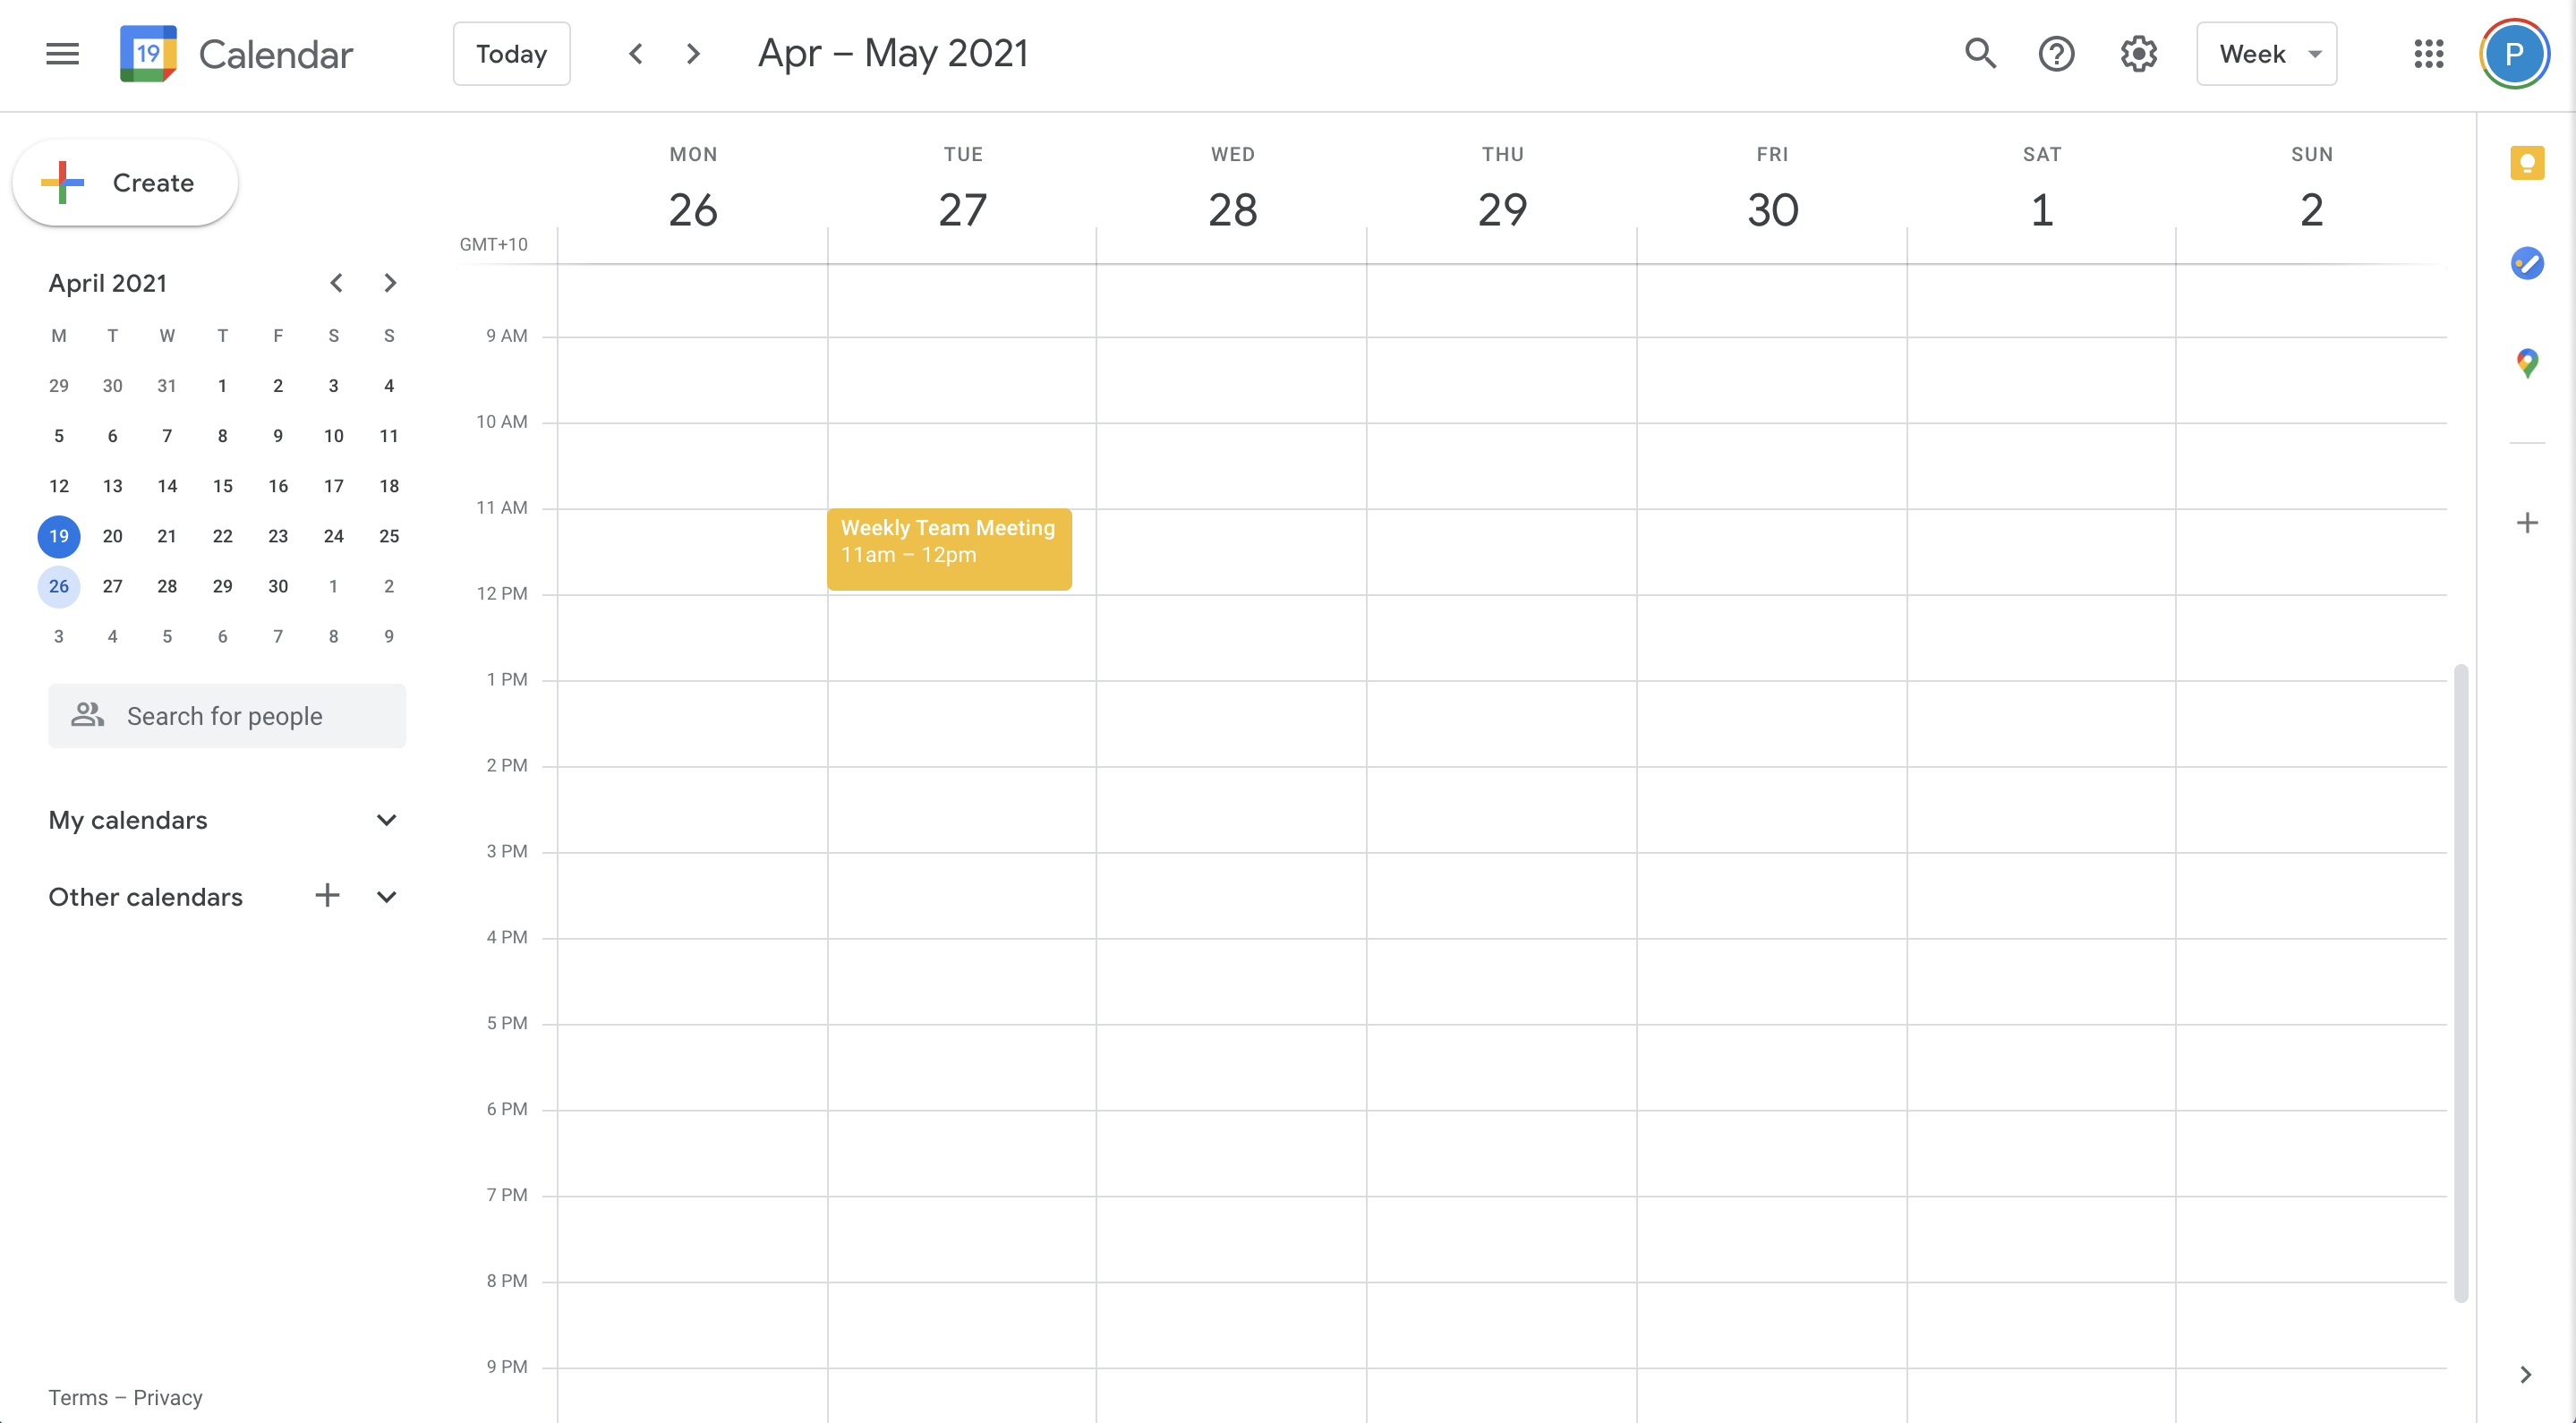 The Missing Thing in Google Calendar